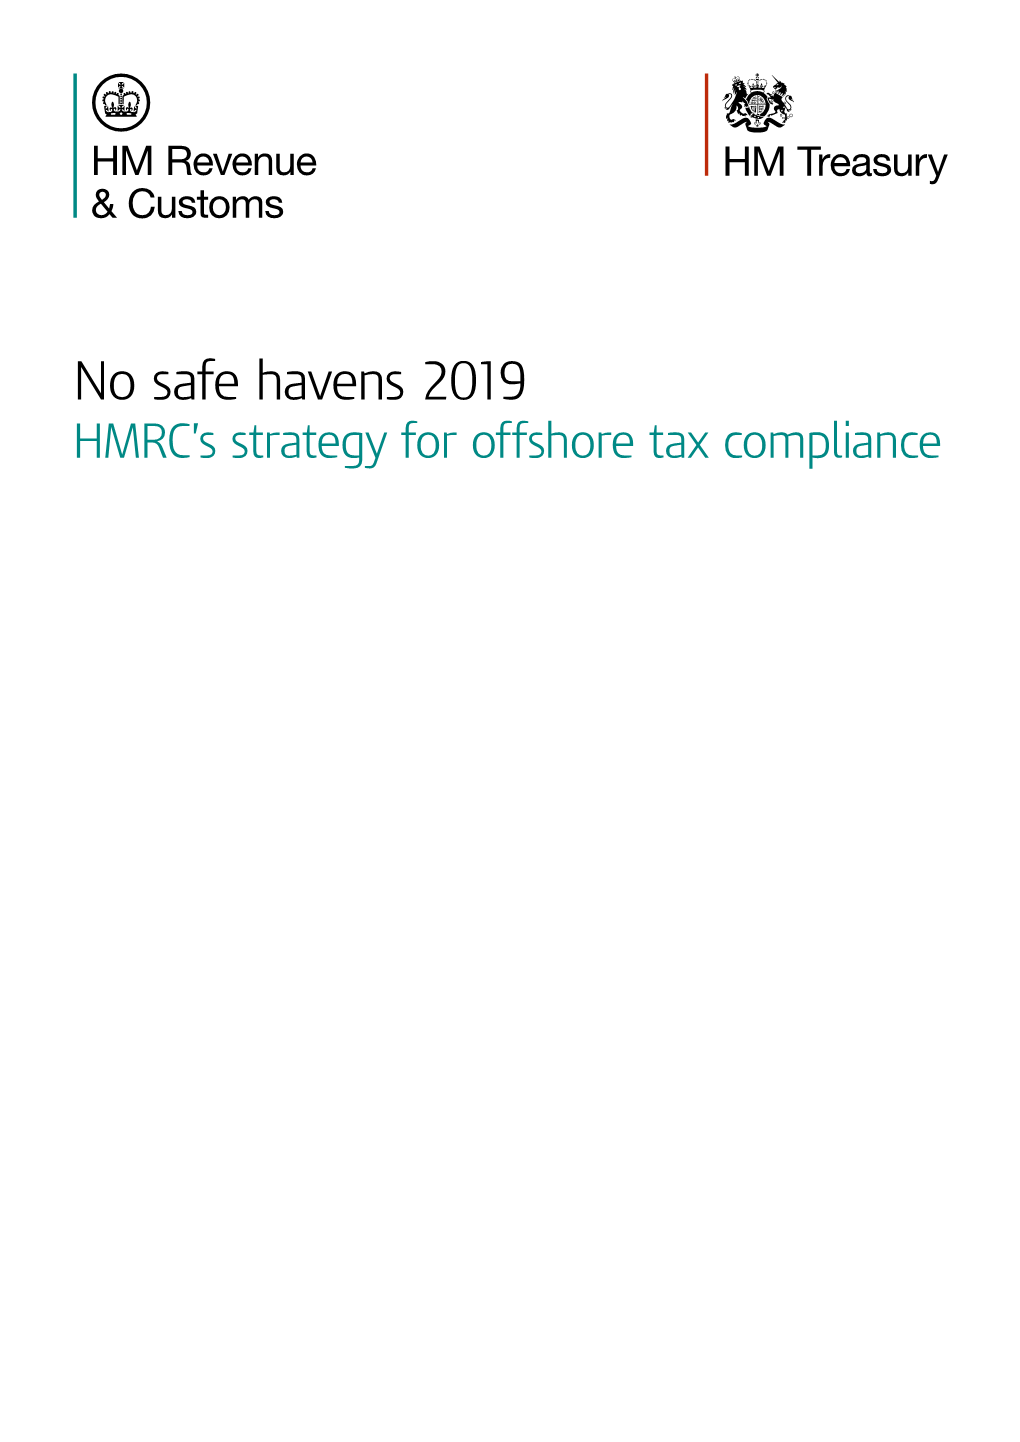 No Safe Havens 2019: HMRC's Strategy for Offshore Tax Compliance